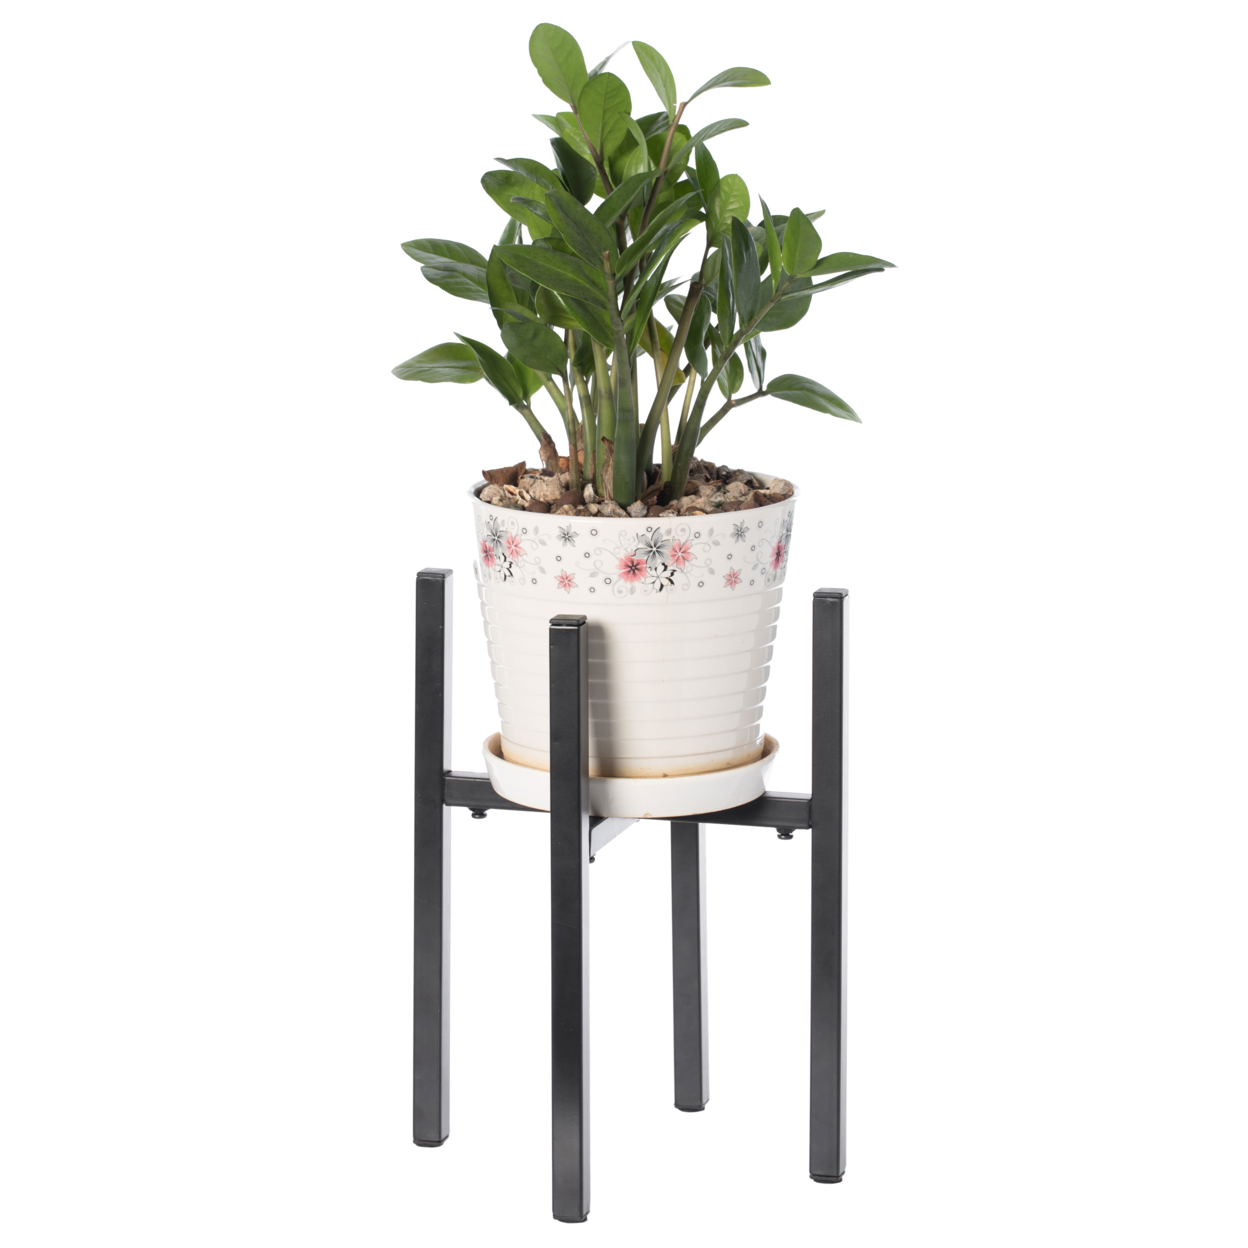 Adjustable Metal Plant Holder, Flower Pot Stand Expands From 9.5- 14.5 Inches